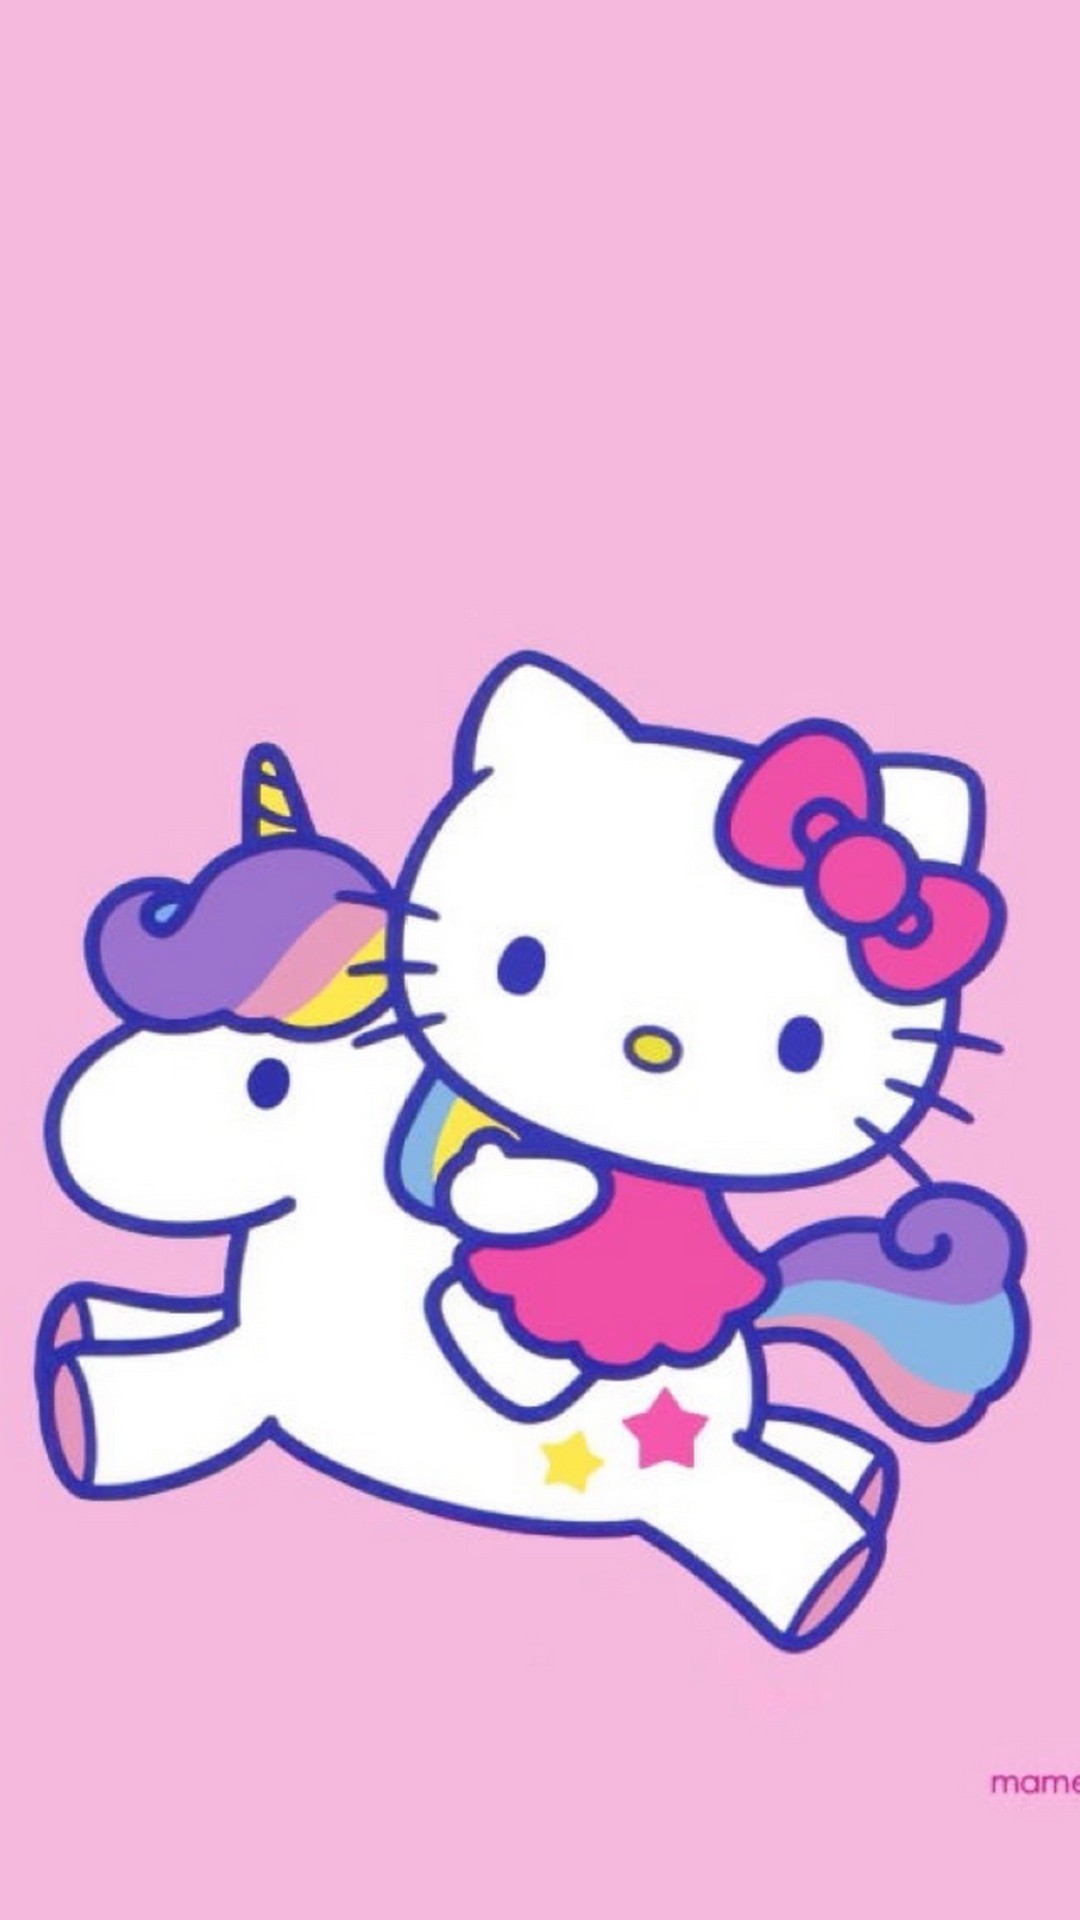 Wallpaper Android Hello Kitty Images with image resolution 1080x1920 pixel. You can make this wallpaper for your Android backgrounds, Tablet, Smartphones Screensavers and Mobile Phone Lock Screen